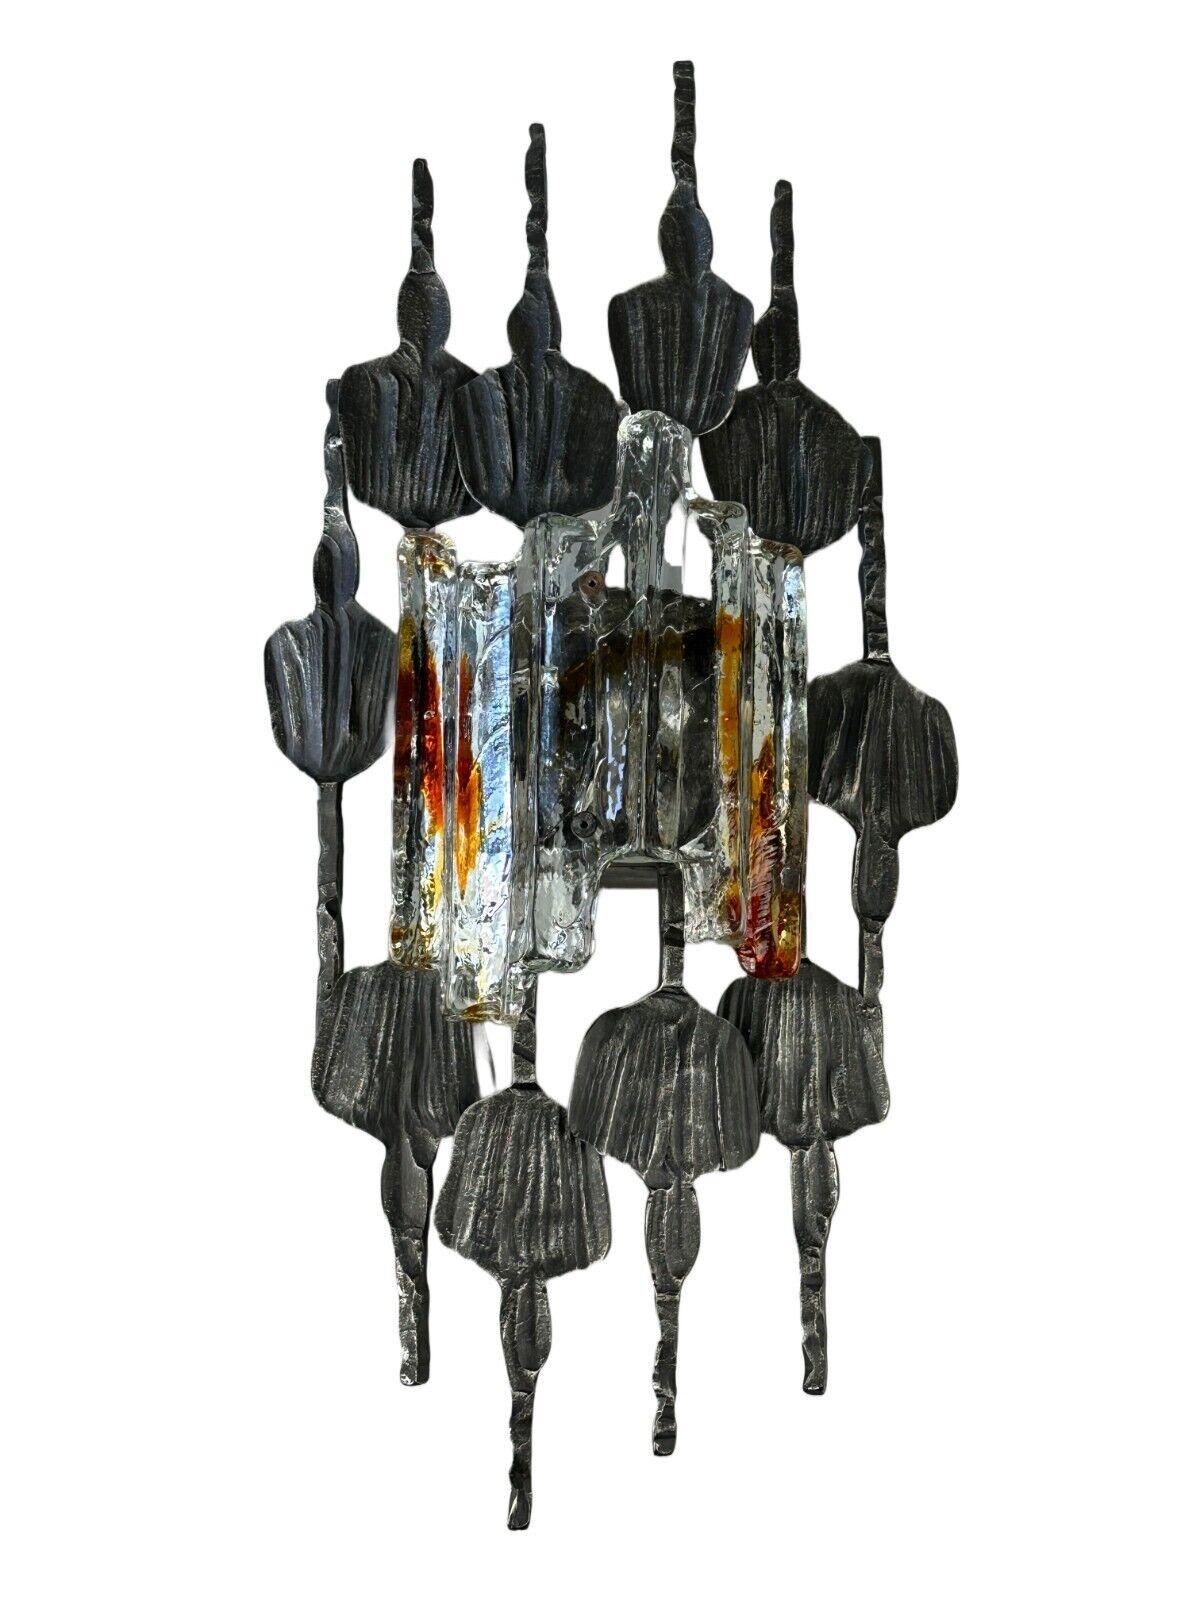 60s 70s Brutalist Wall Lamp Tom Ahlström & Hans Ehrlich Wall Sconce

Object: wall lamp

Manufacturer: Ahlstrom & Ehrlich

Condition: good

Age: around 1960-1970

Dimensions:

Height = 72cm
Width = 35cm
Depth = 15cm

Other notes:

E27 socket

The